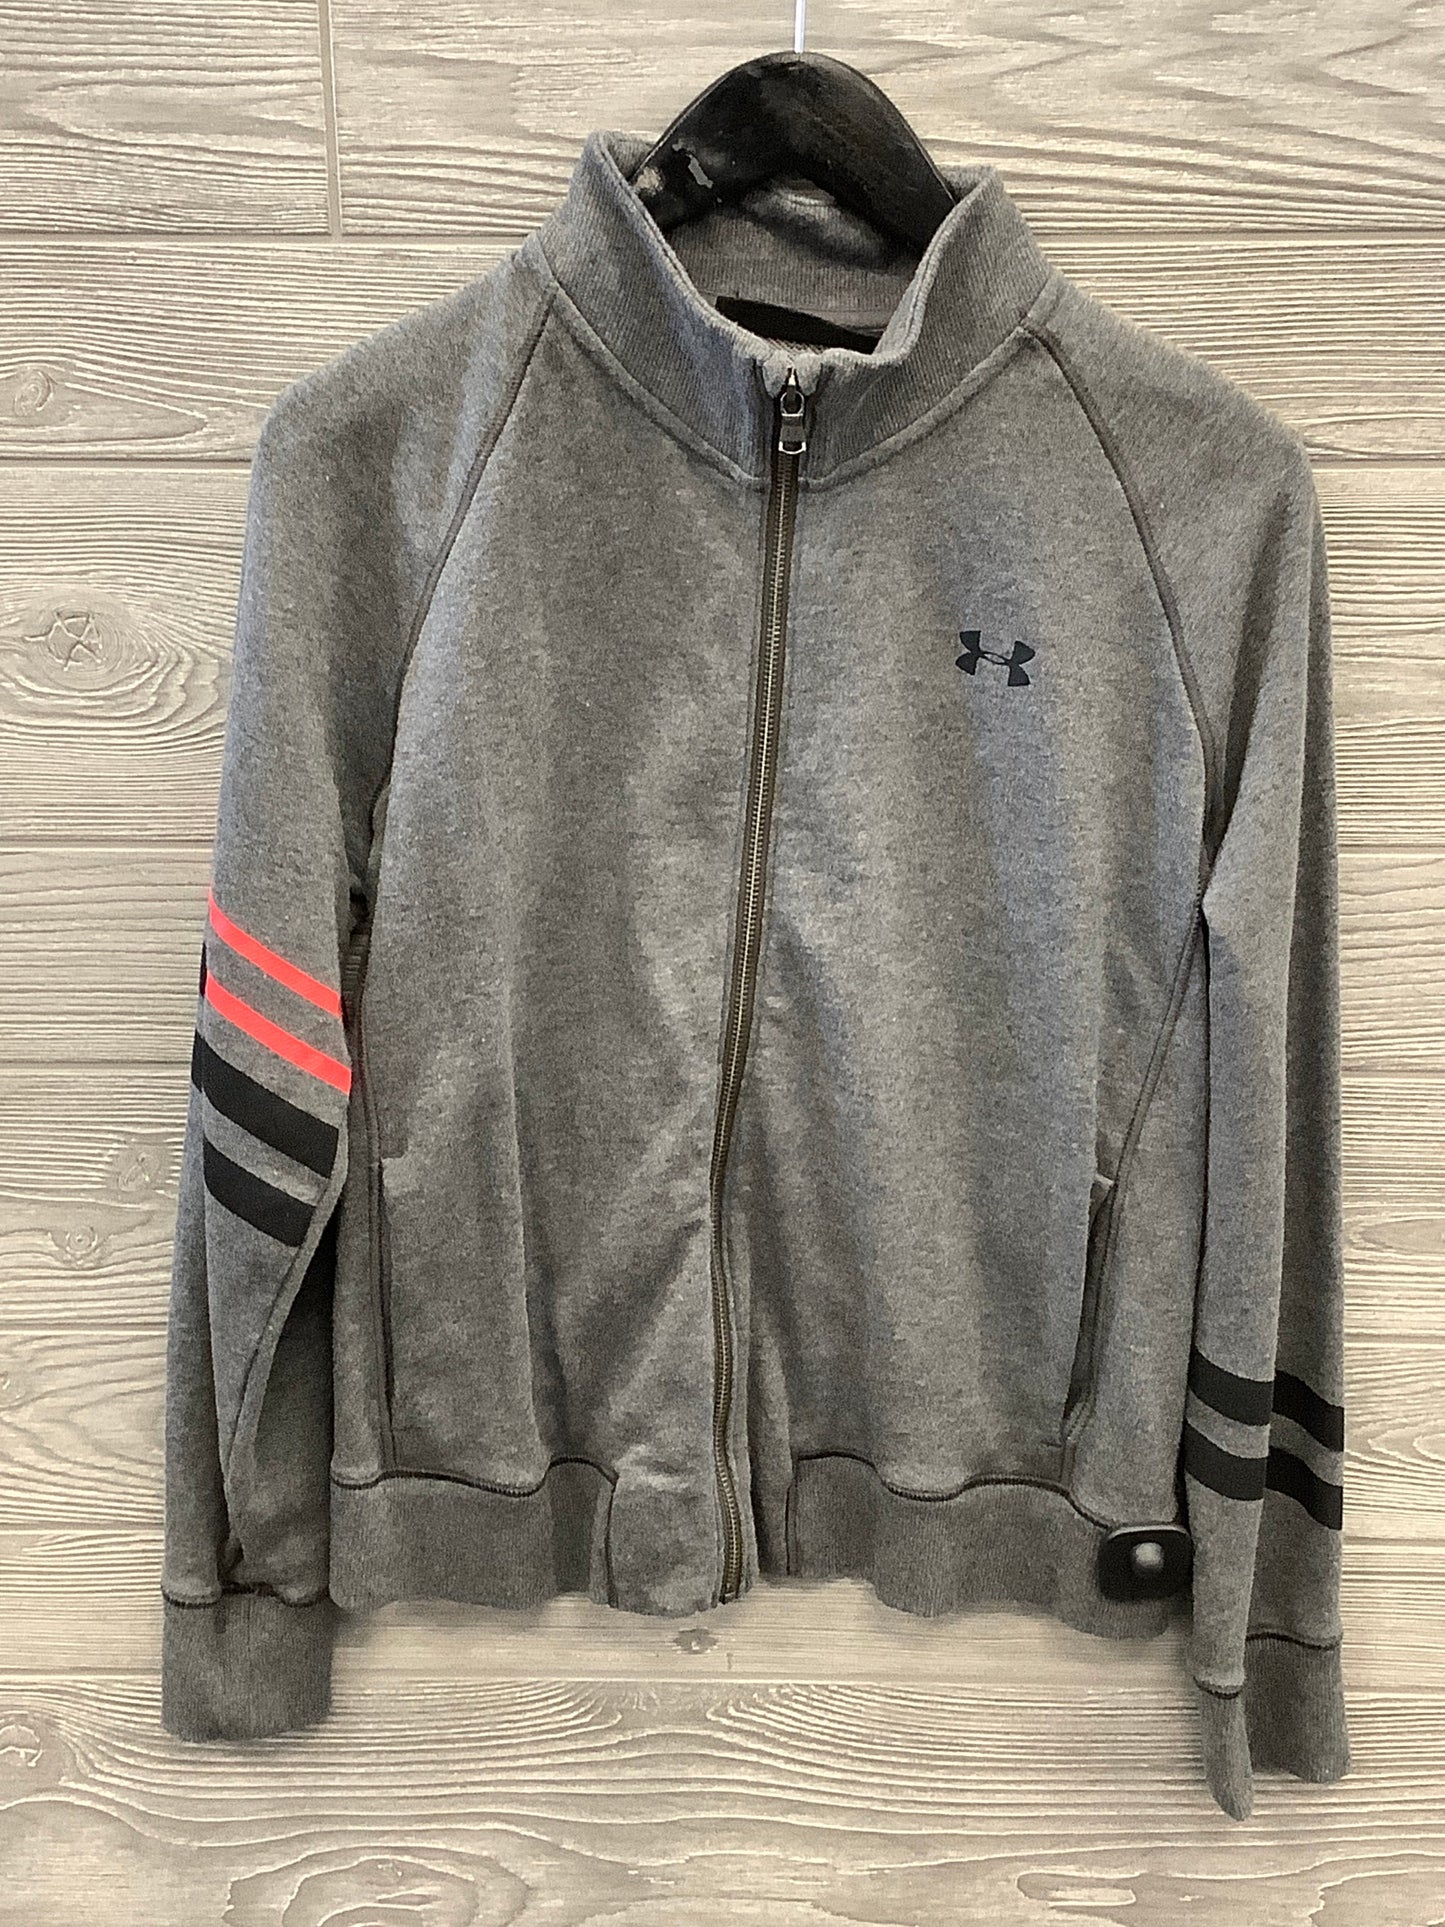 Athletic Sweatshirt Crewneck By Under Armour  Size: S